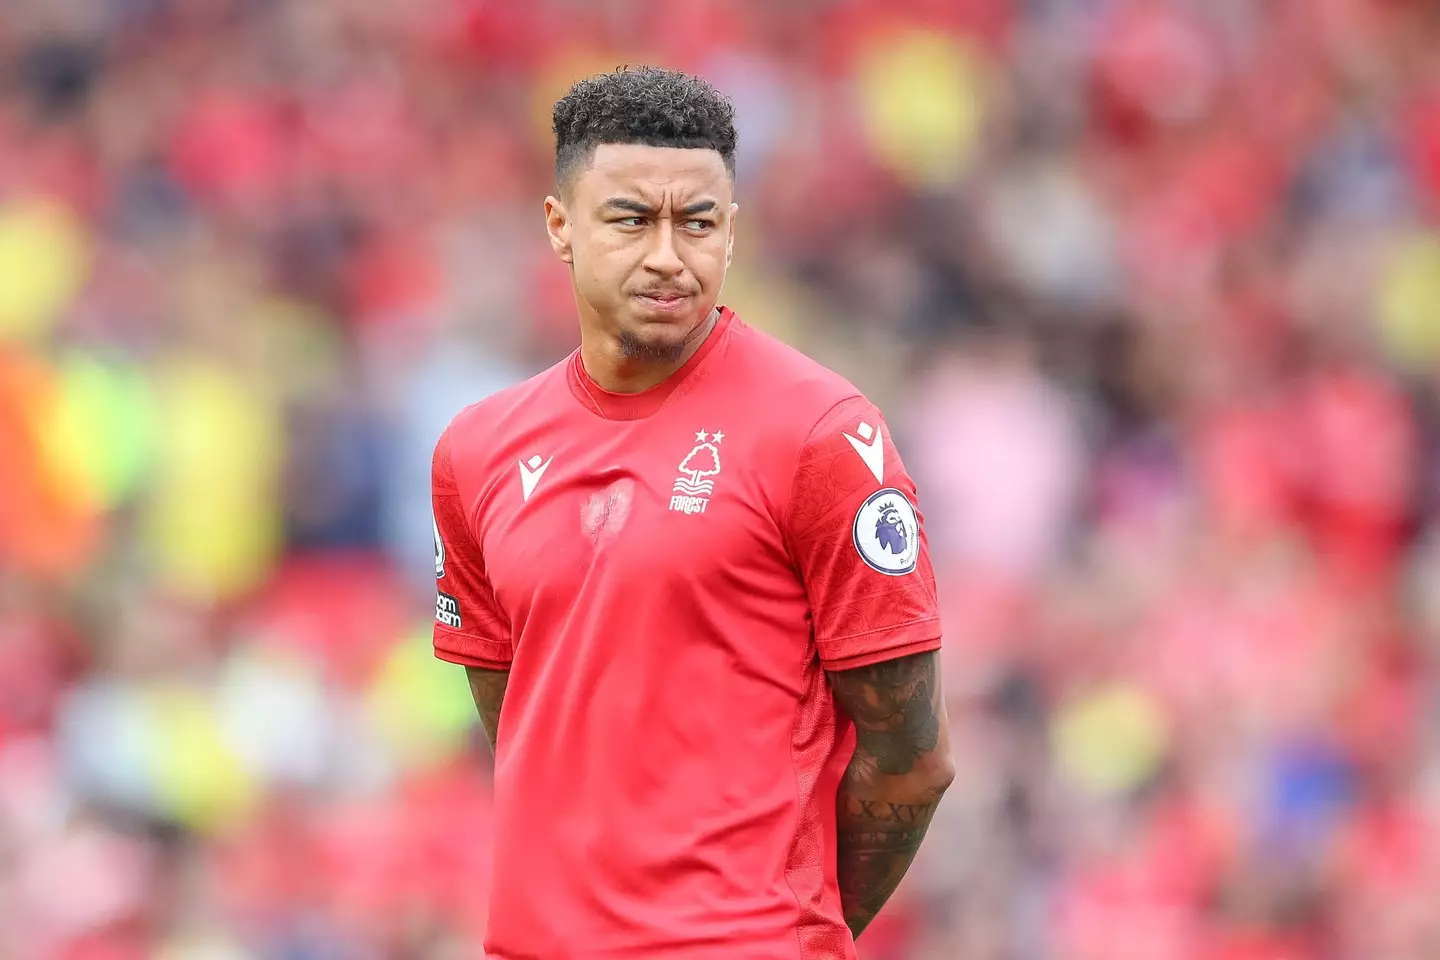 Lingard in action for Nottingham Forest against Bournemouth earlier this month. (Image